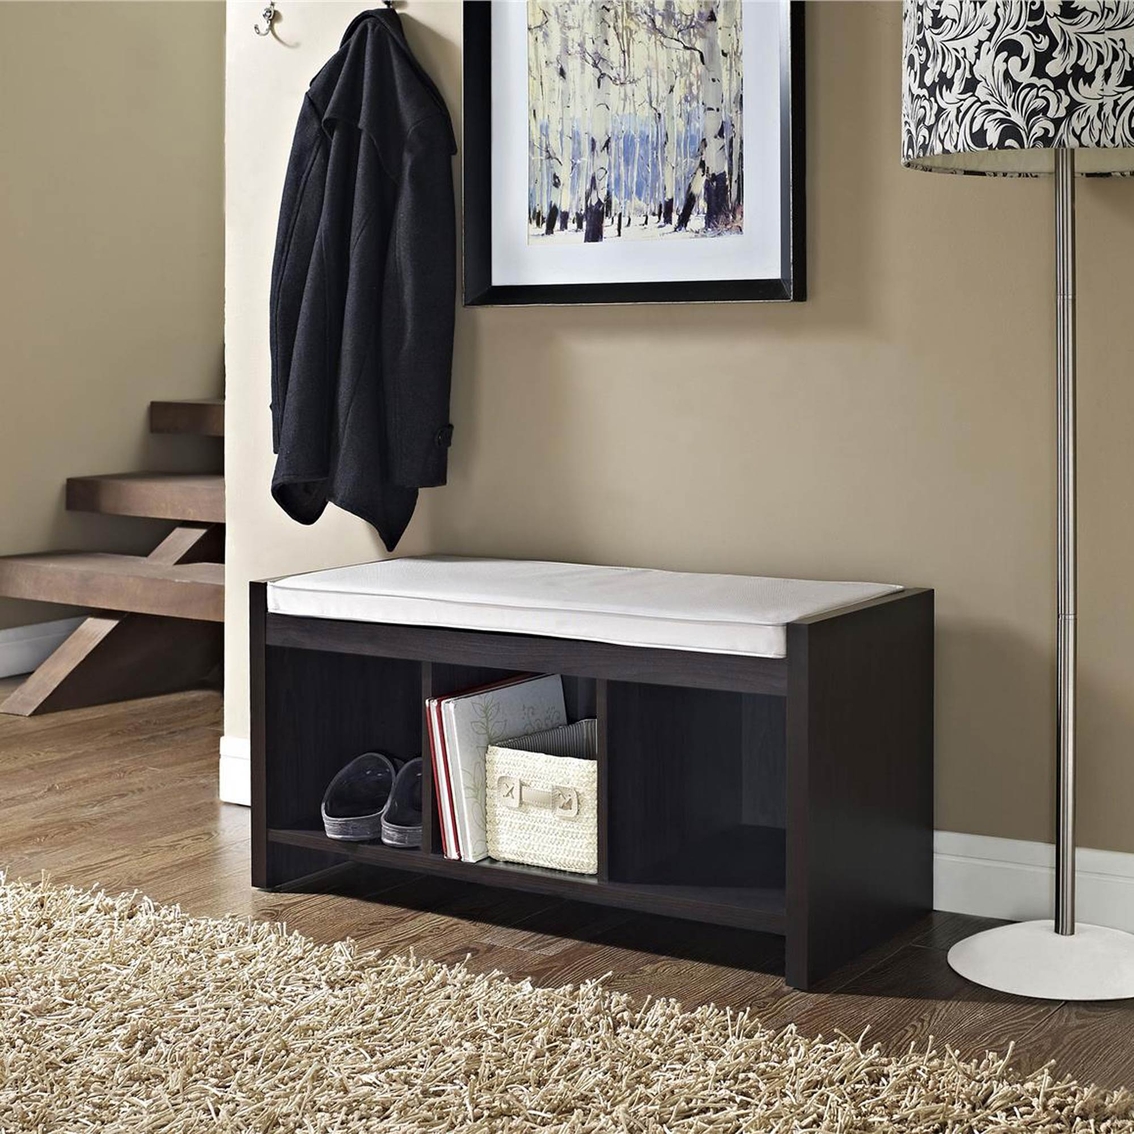 Altra Penelope Entryway Storage Bench with Cushion - Image 3 of 4